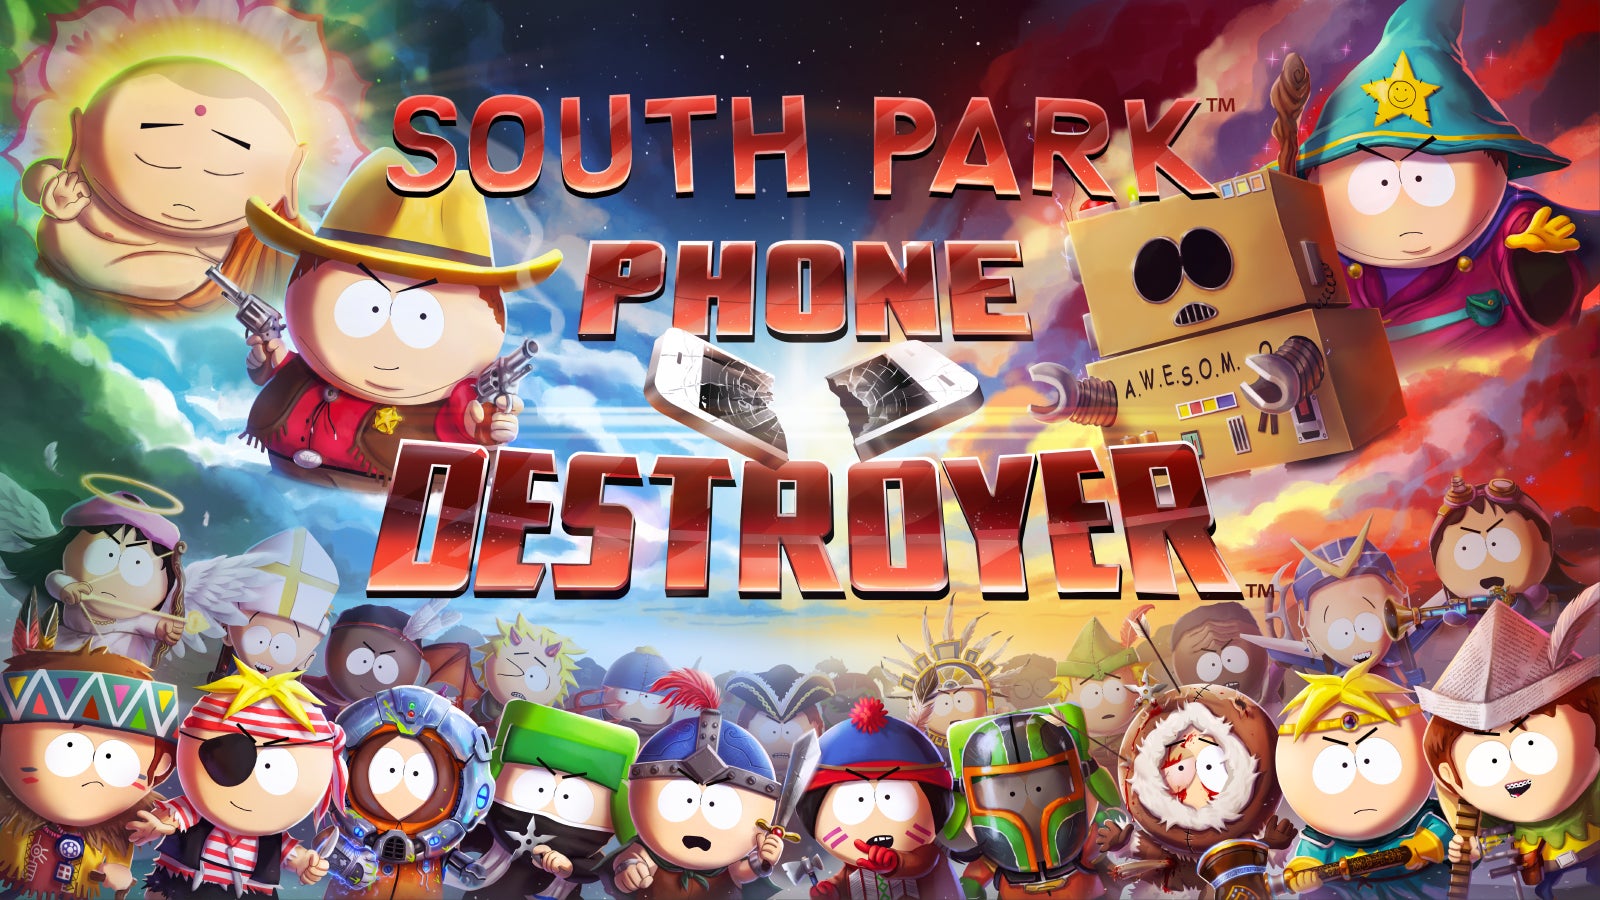 Image for Ubisoft announces South Park: Phone Destroyer, which hopefully won't actually destroy your phone